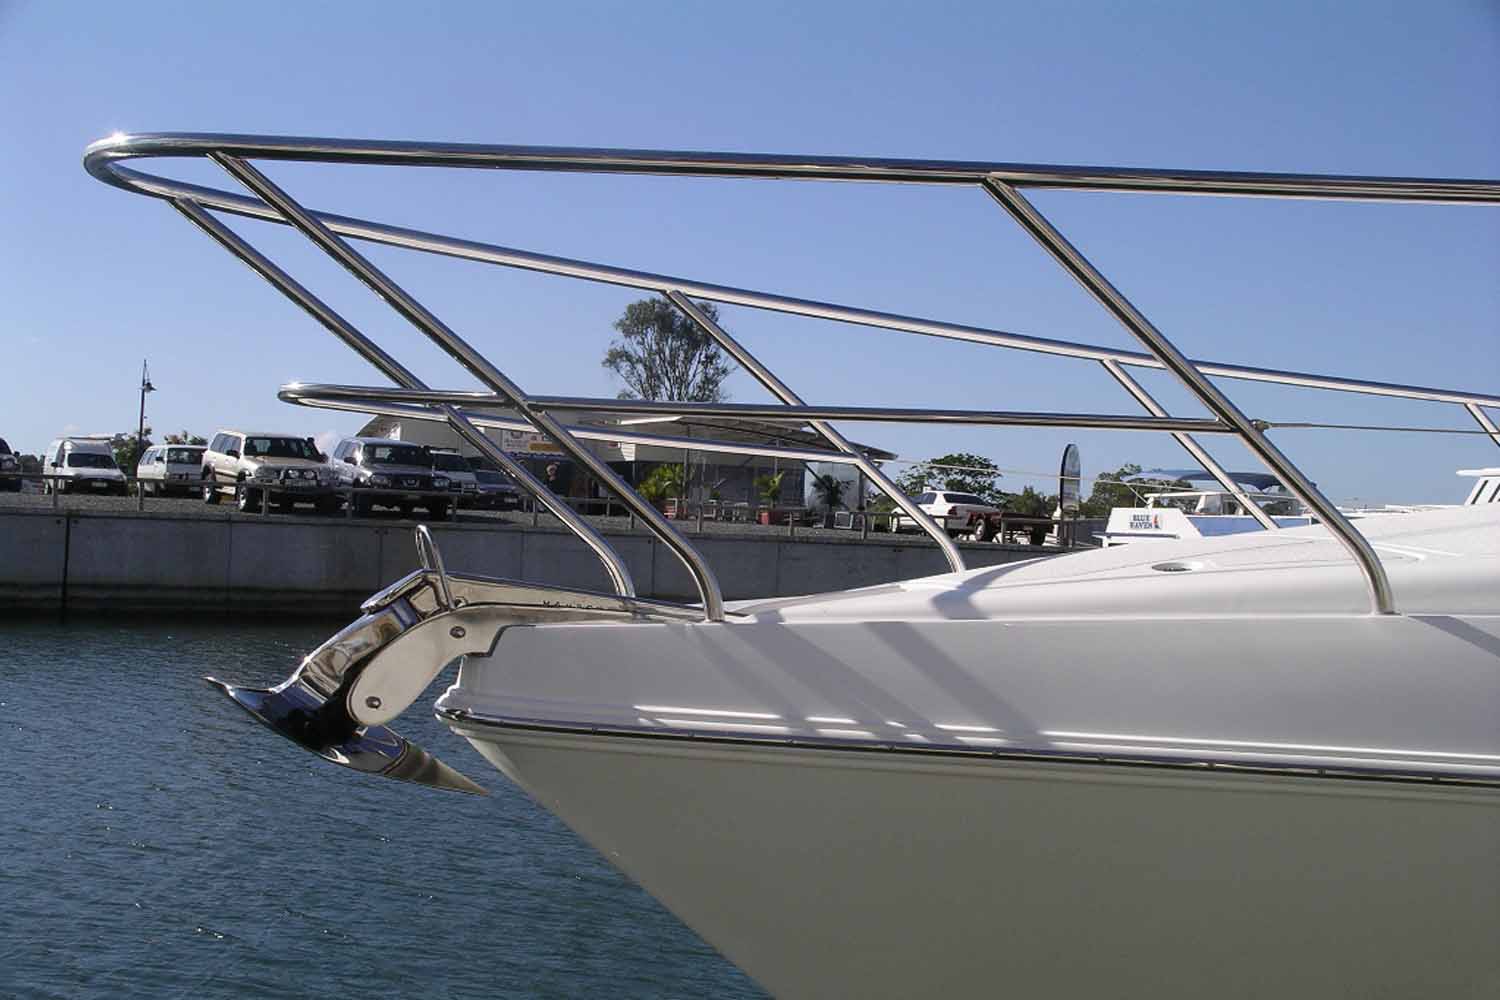 Stainless hand rails on boat